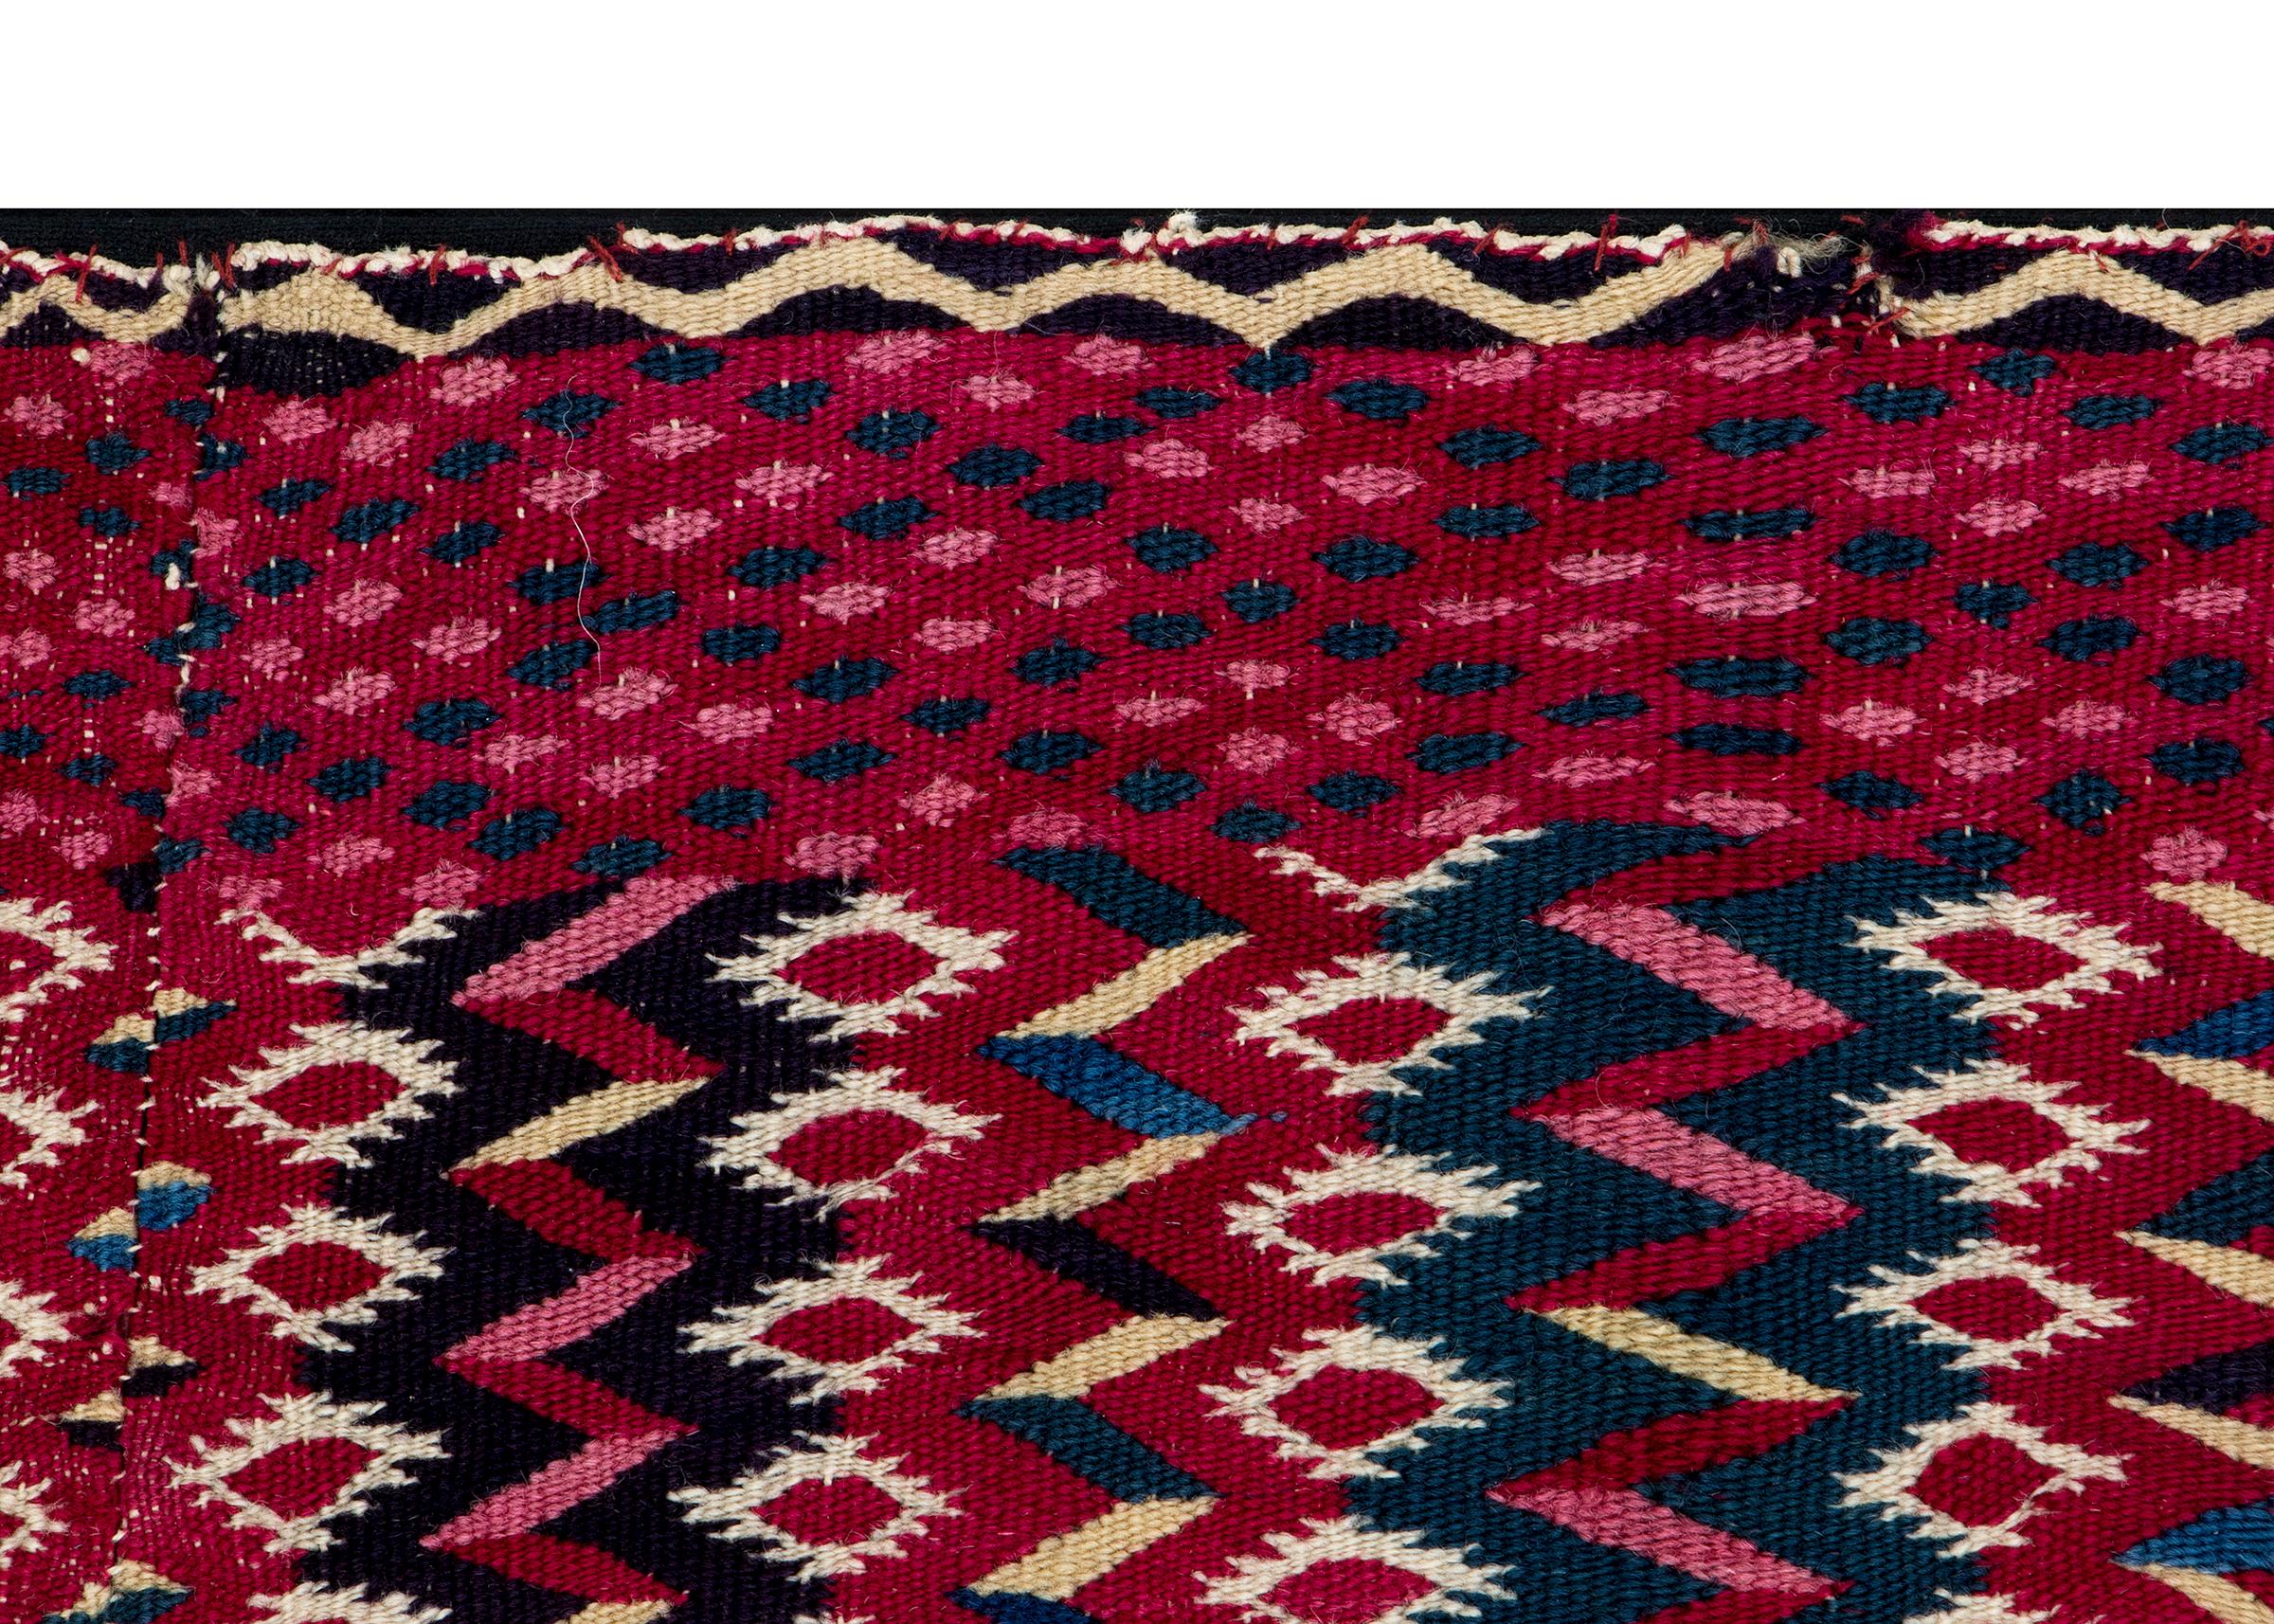 Wool Antique 1850s Mesoamerican Saltillo Serape Transitional Mounted Textile For Sale